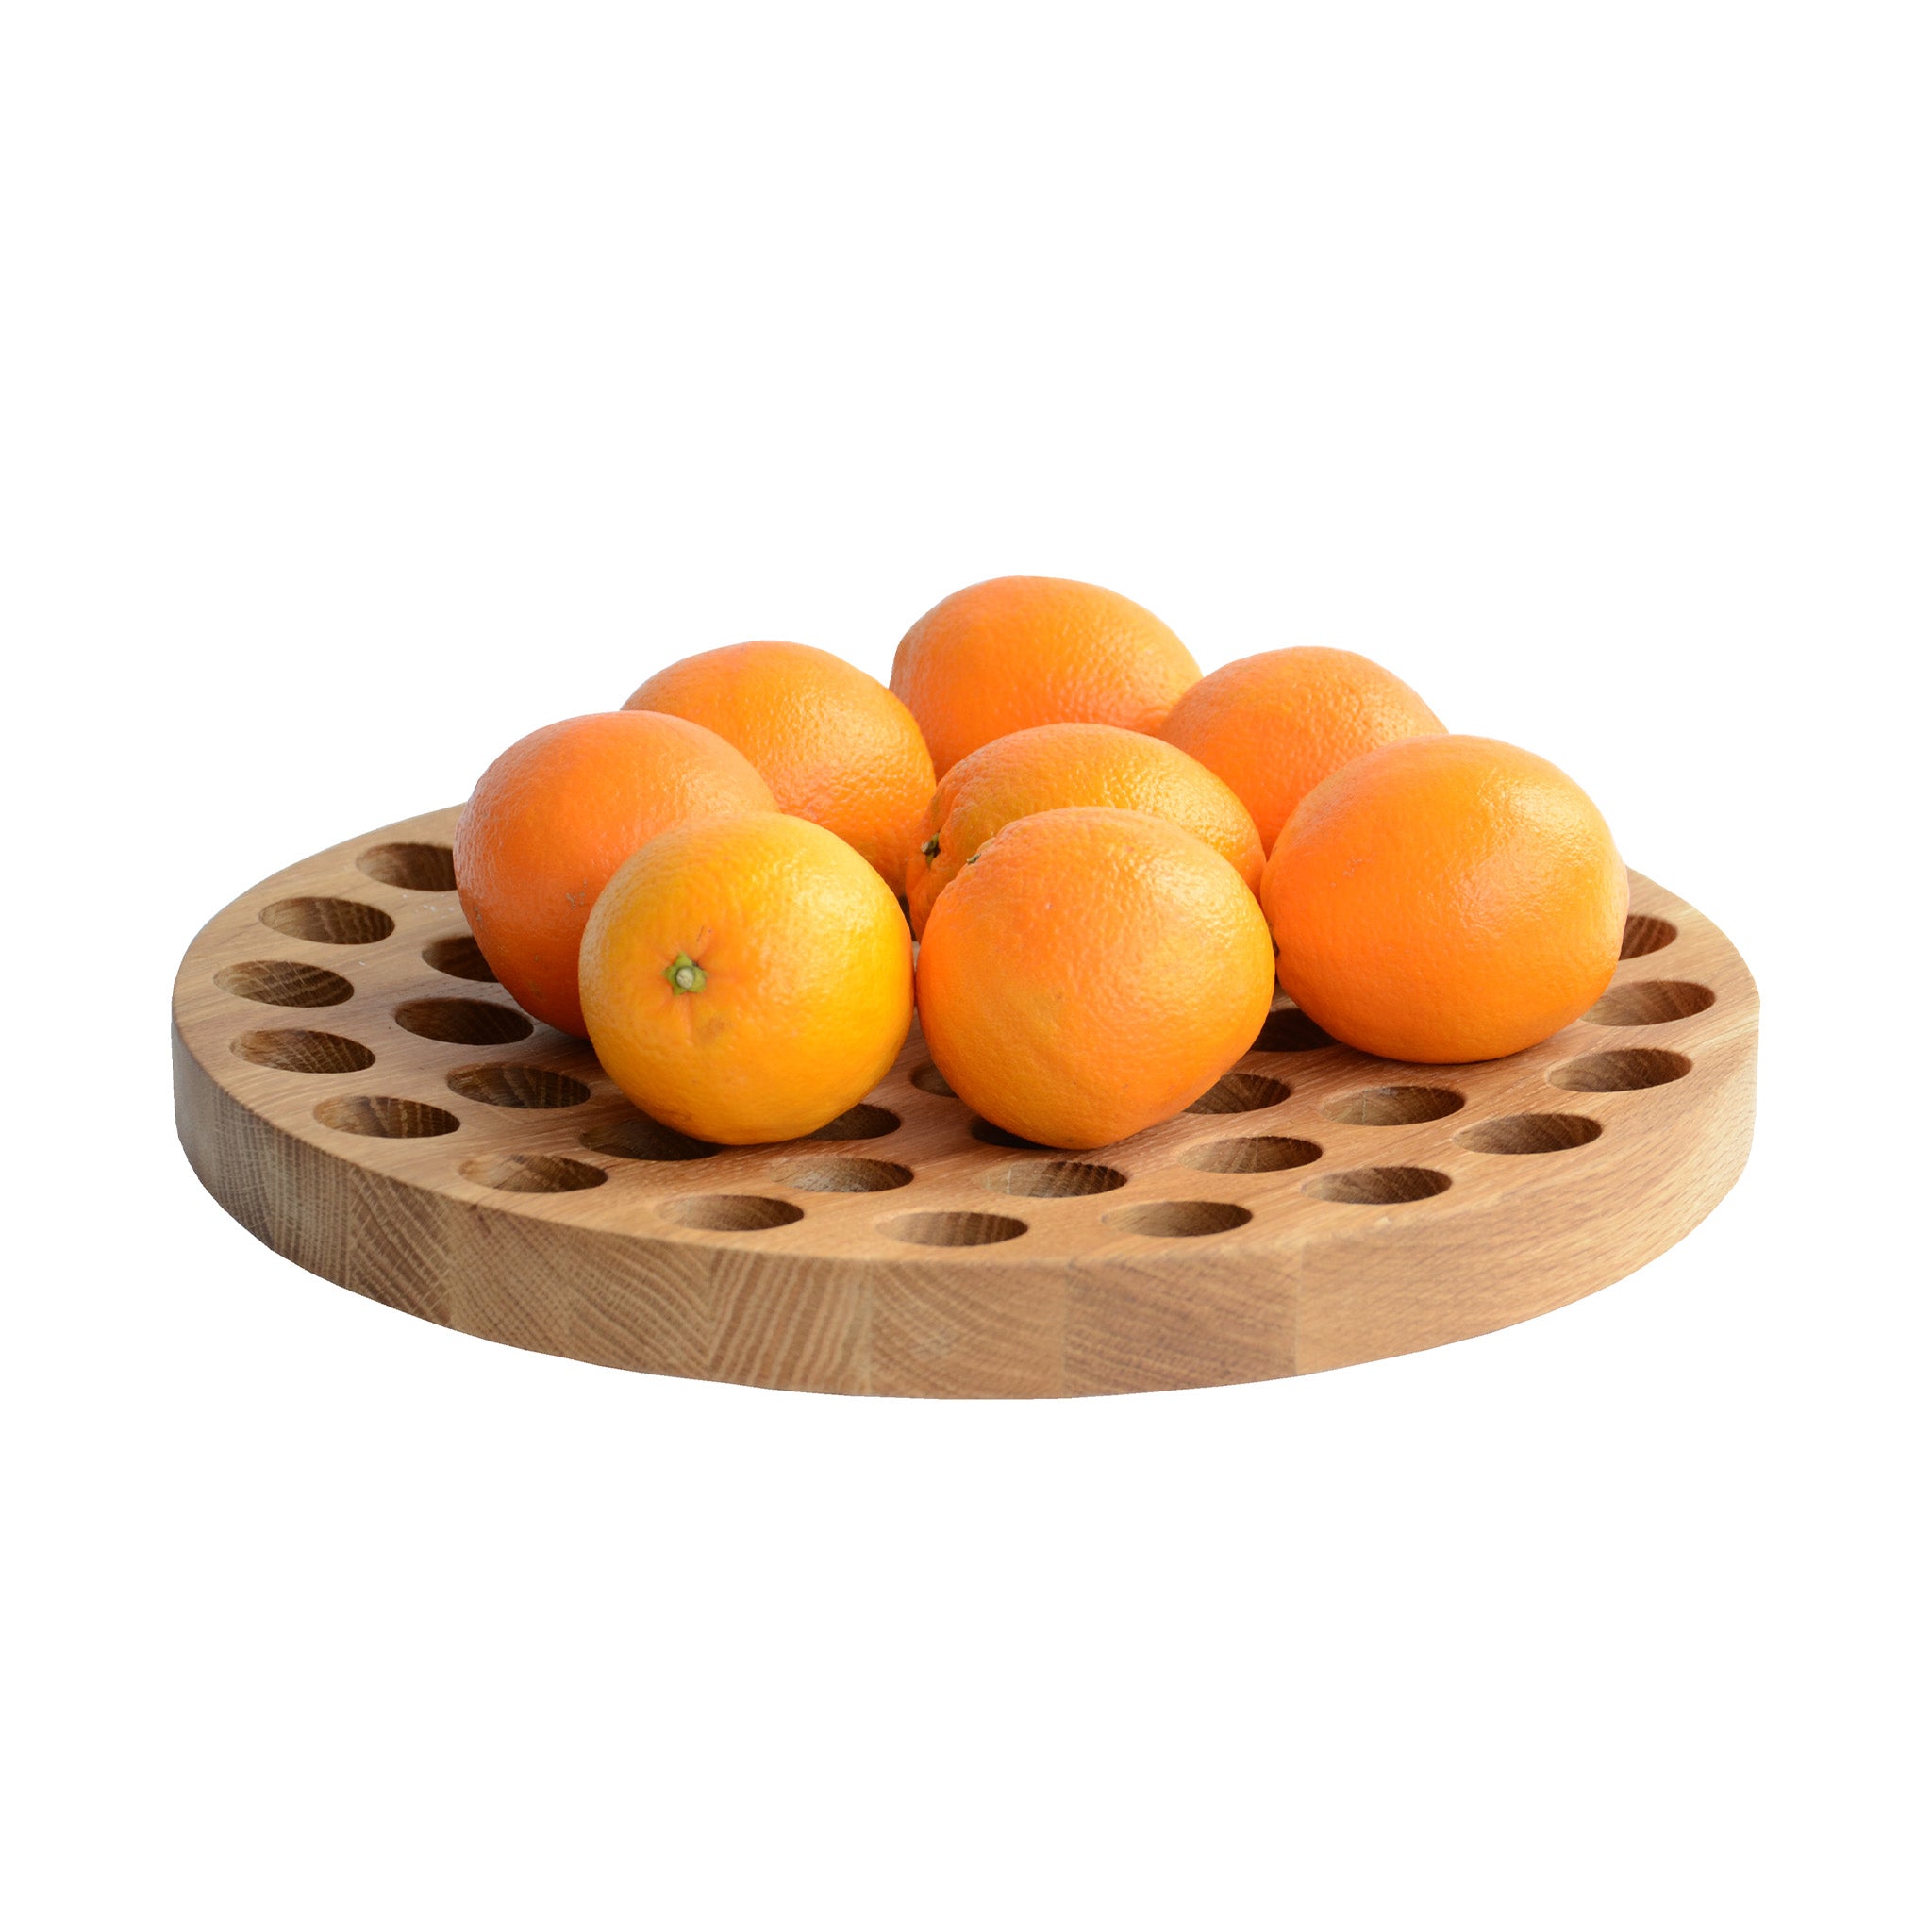 Geo Fruit Bowl by Lincoln Rivers and Huyulin Hu for Wireworks